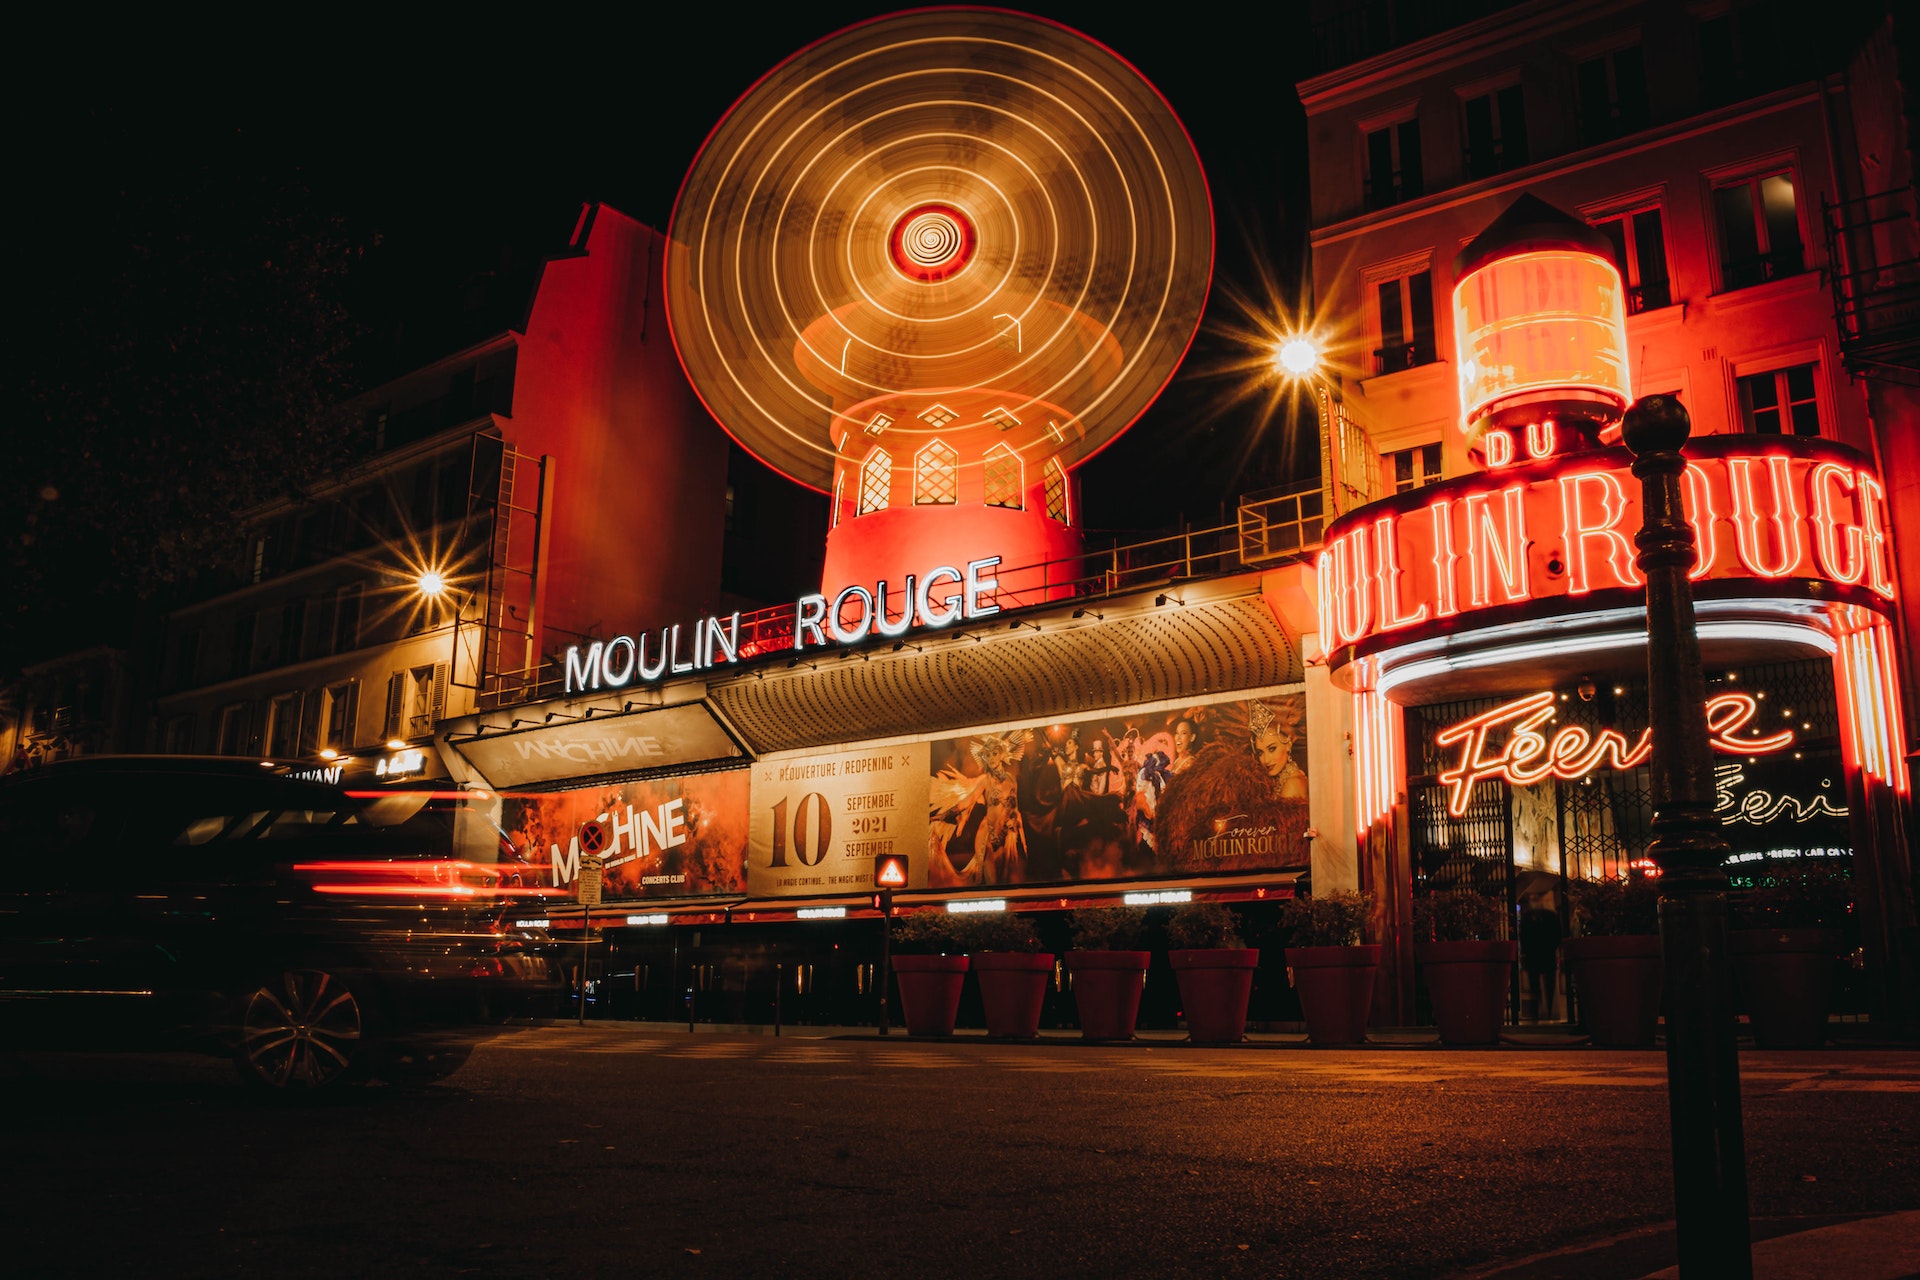 The Moulin Rouge at night -- sign in white letters underneath a large red windmill